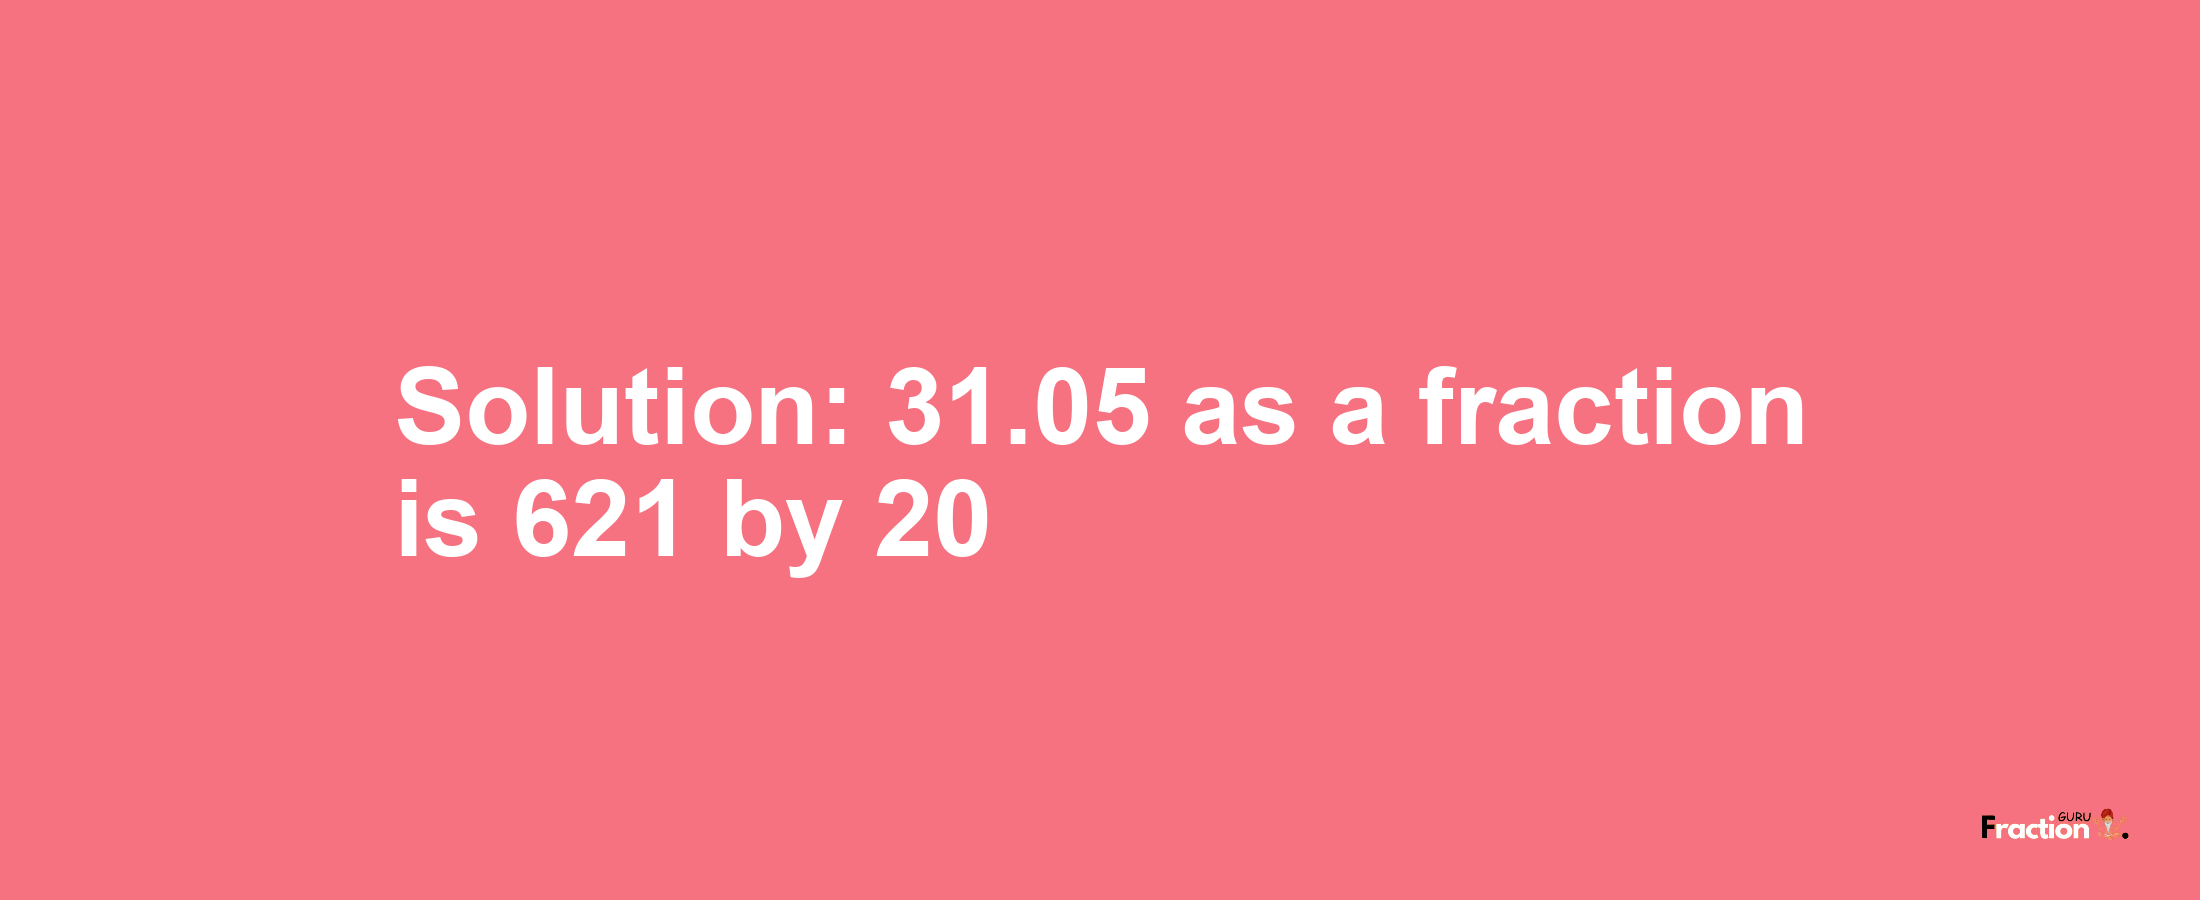 Solution:31.05 as a fraction is 621/20